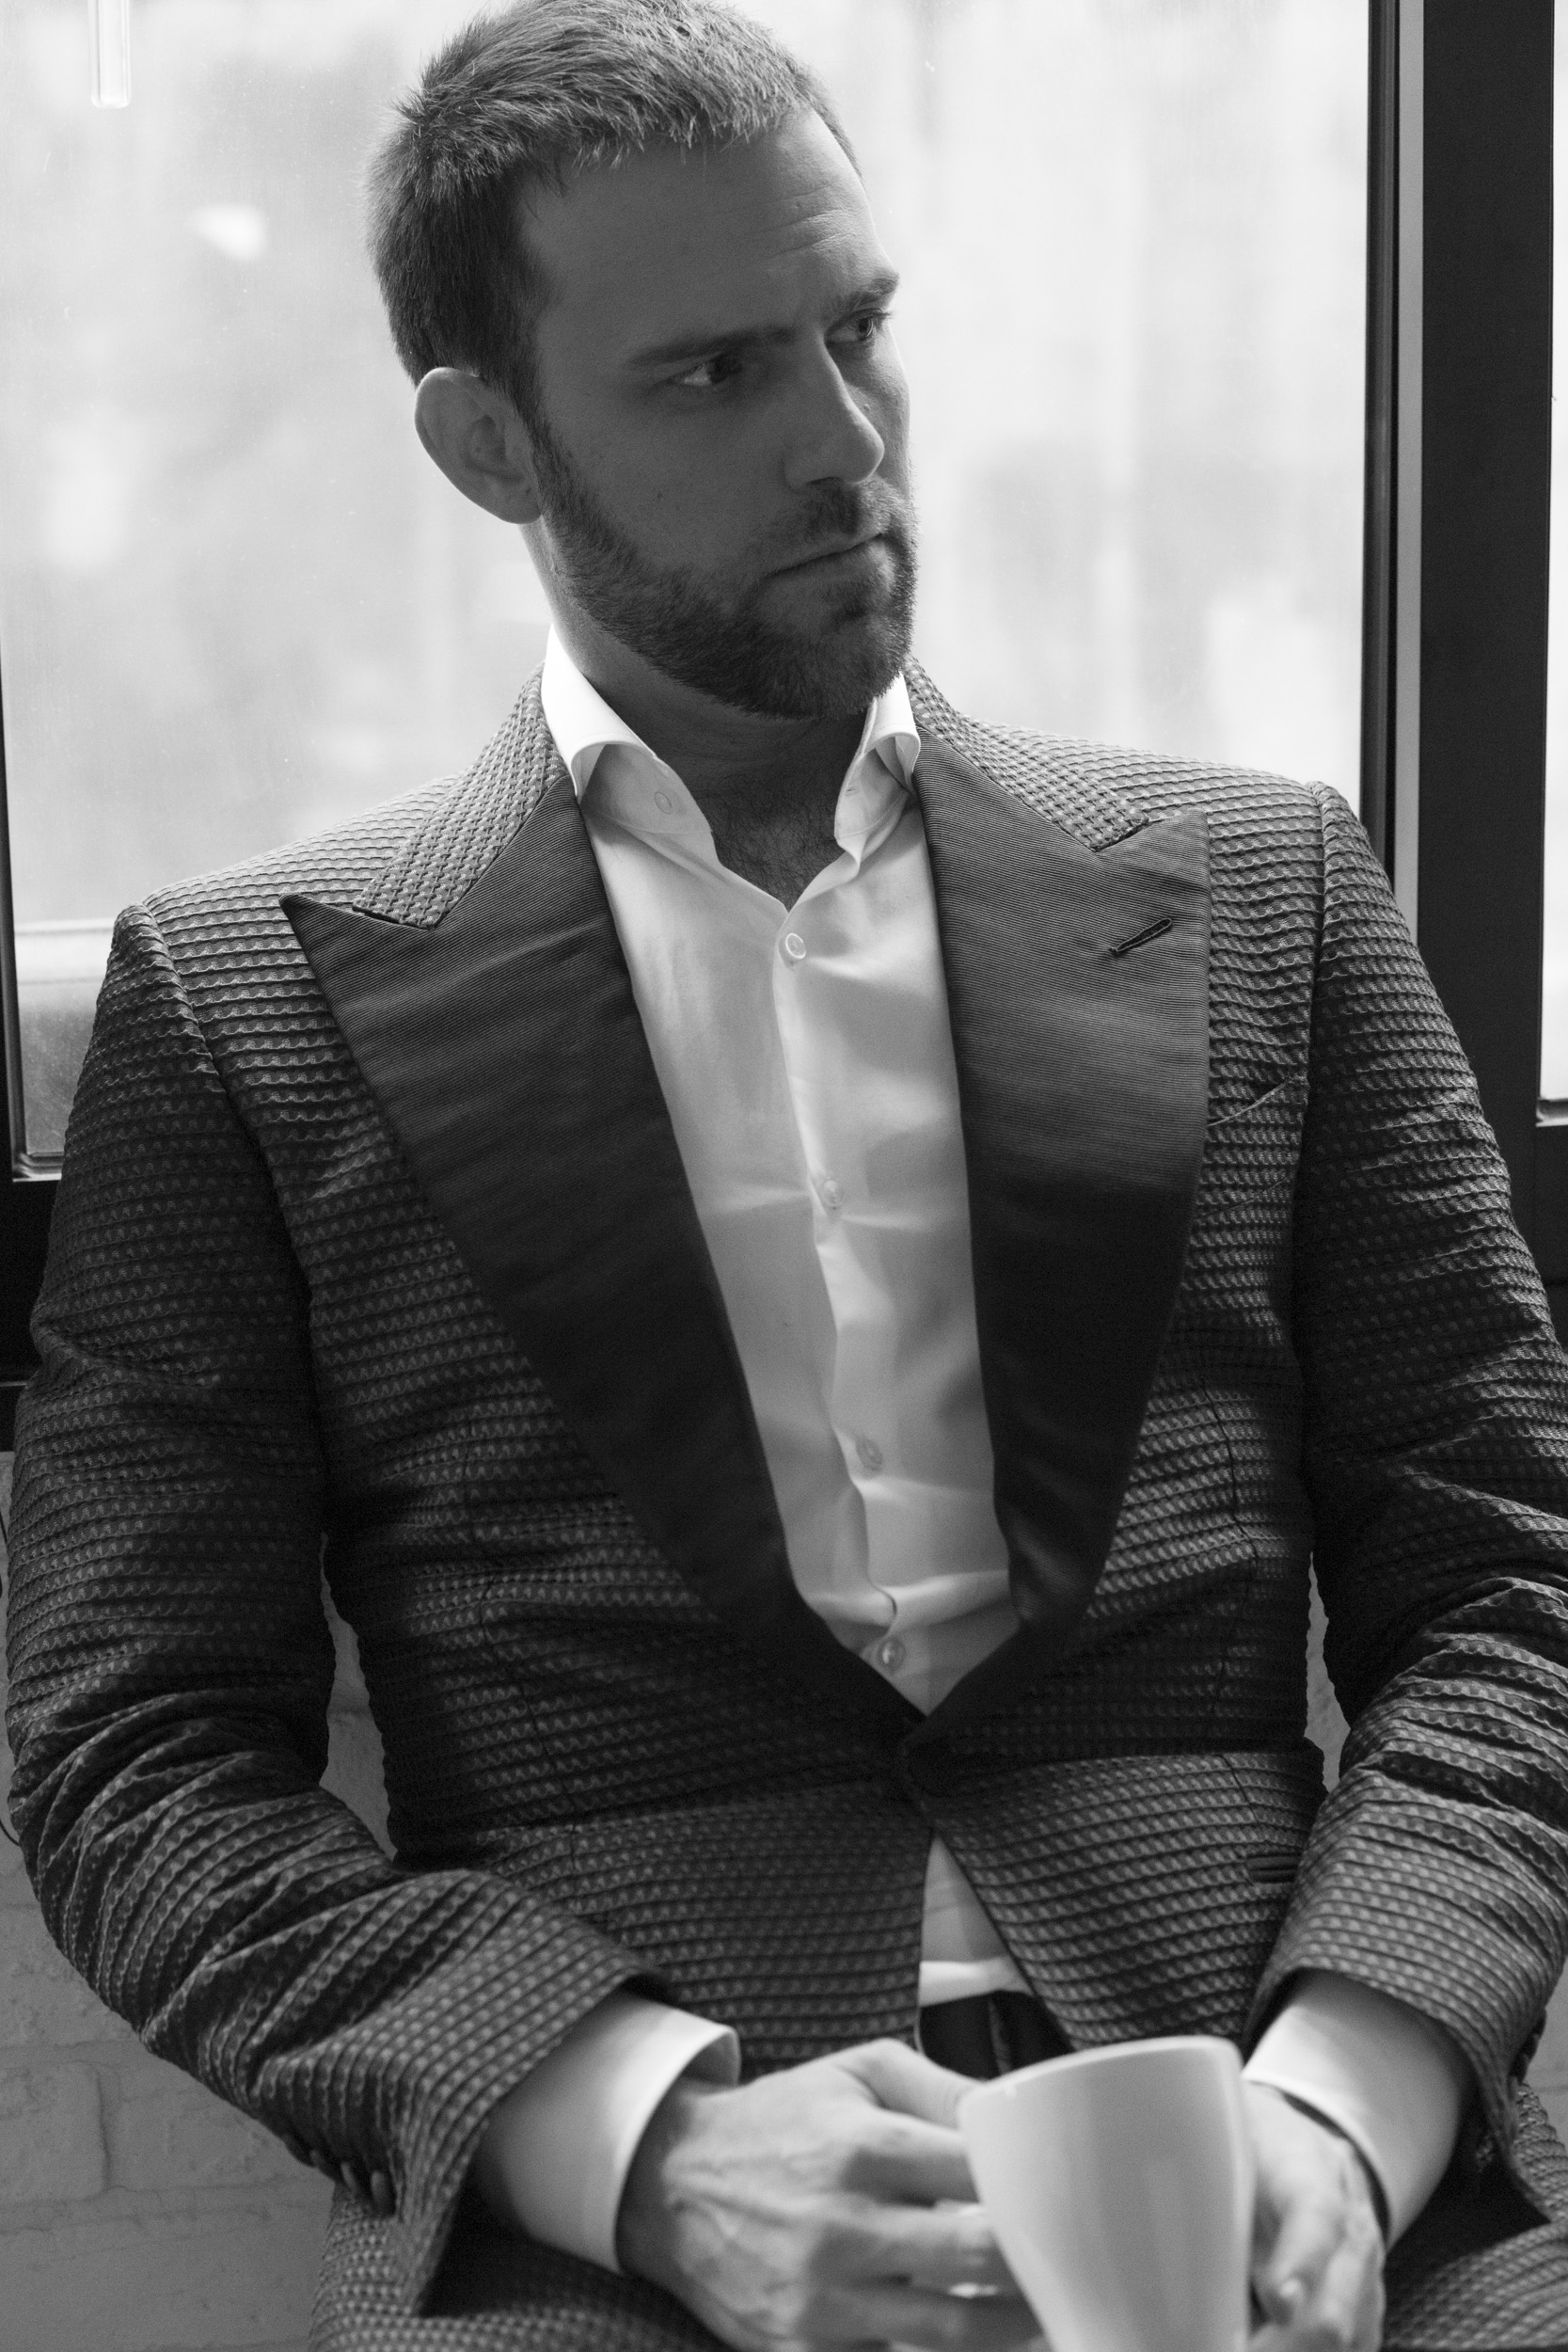 Ryan Pyle from a recent photo shoot for MRRM Magazine in Hong Kong.